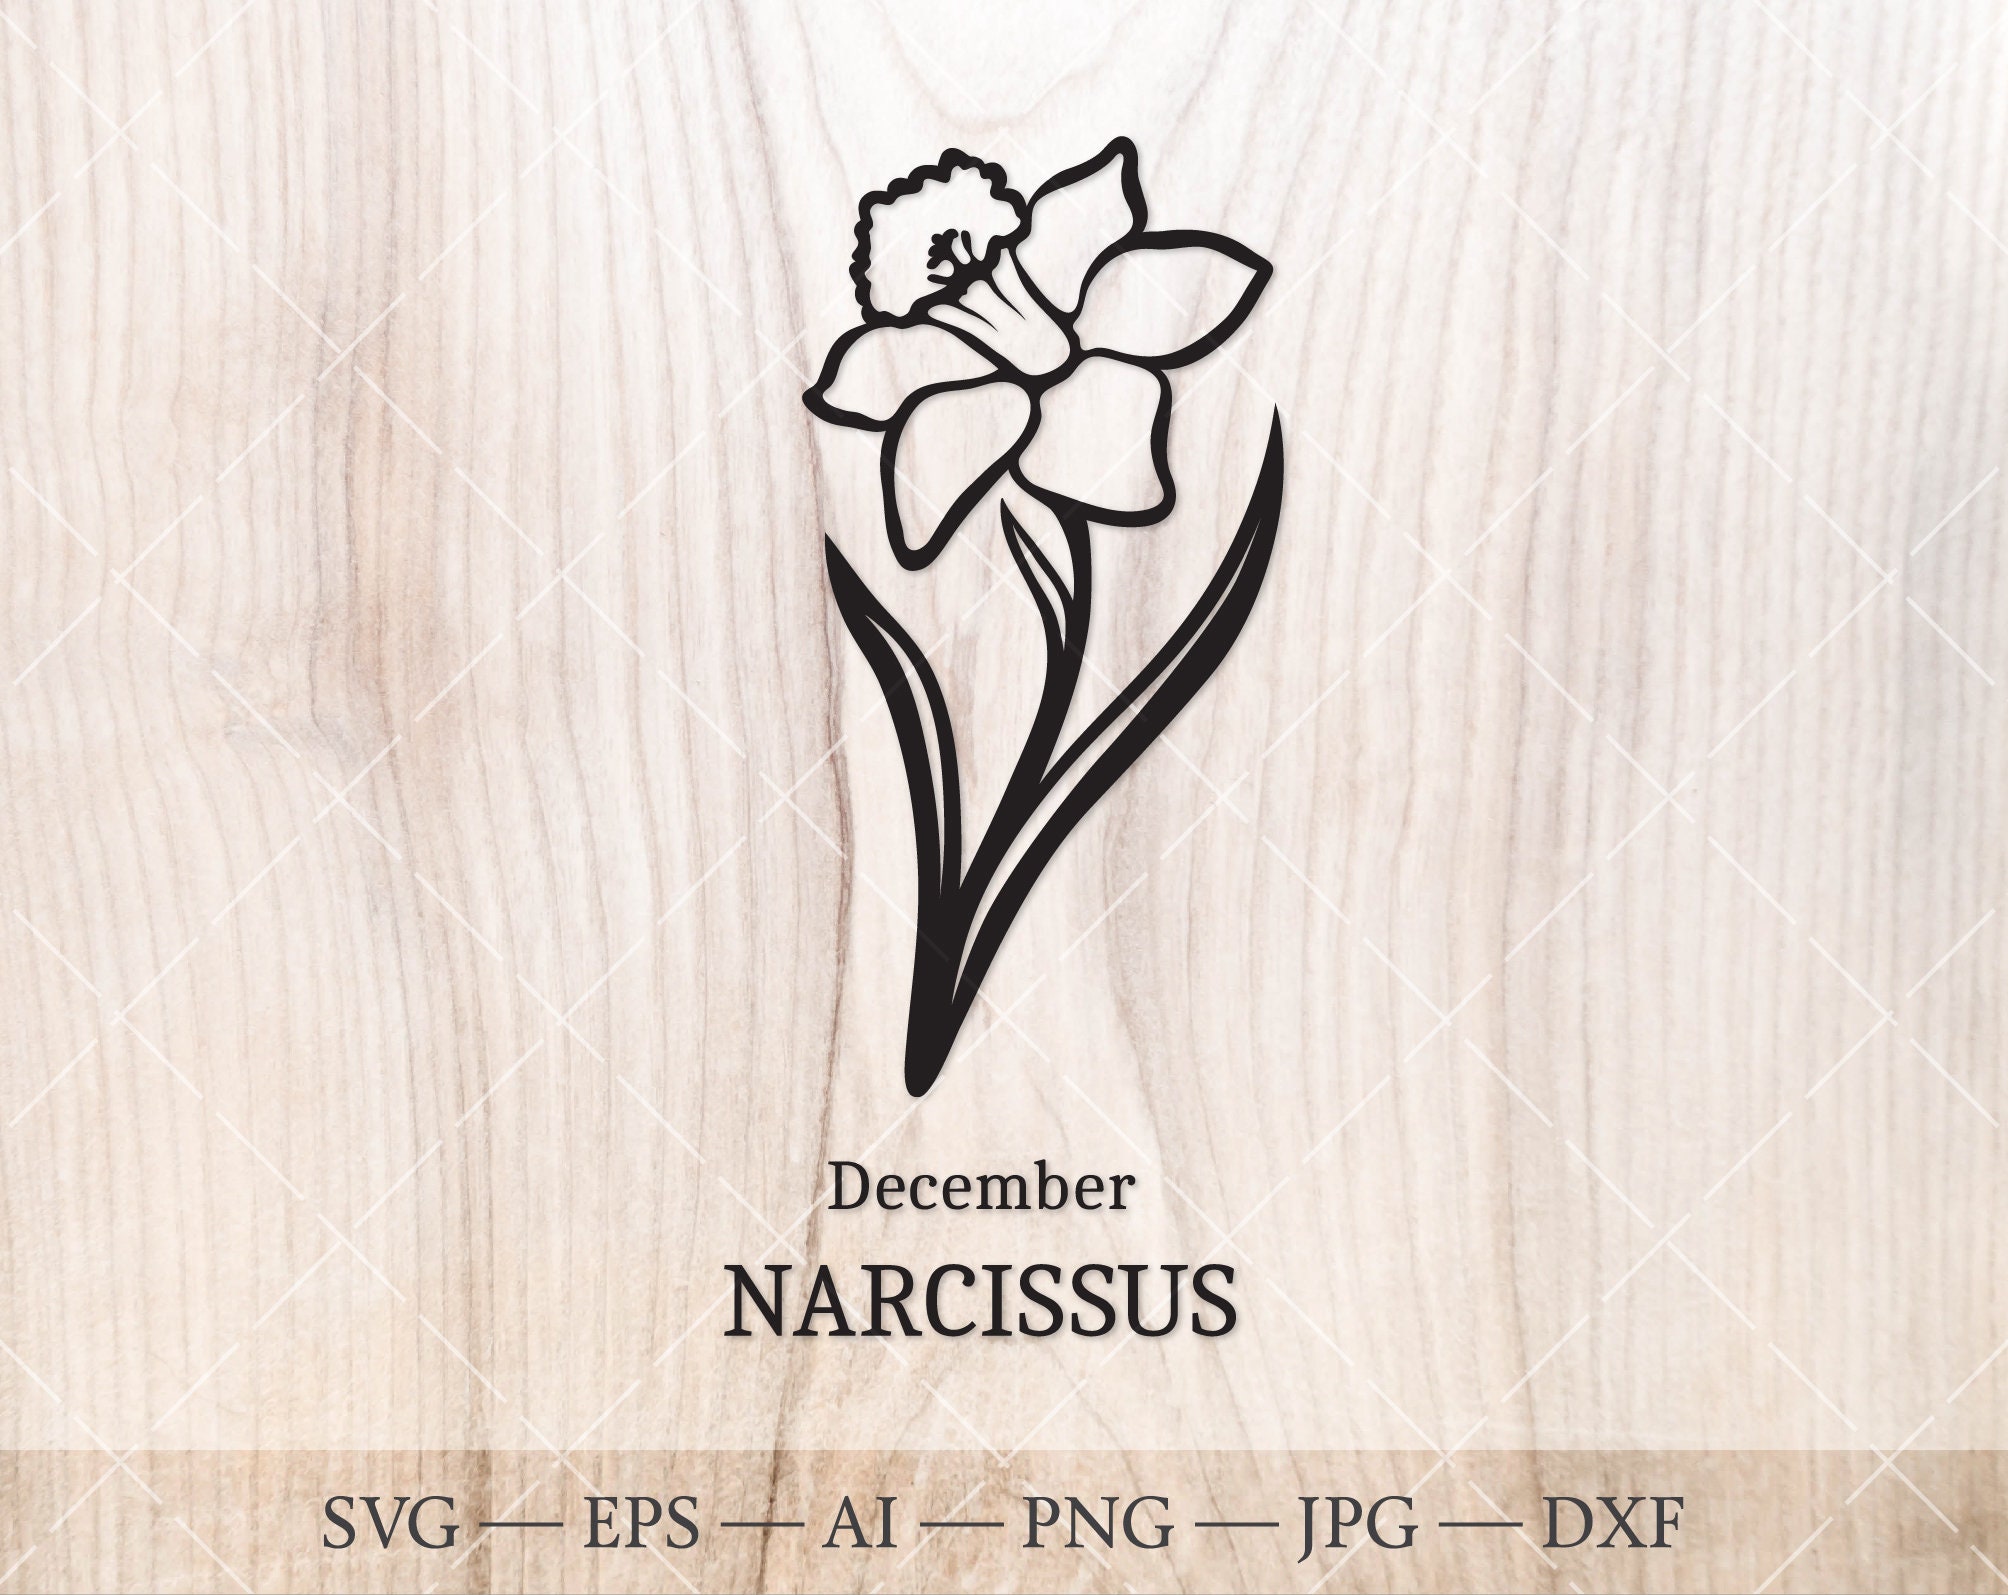 Share 95 about narcissus flower tattoo best  indaotaonec